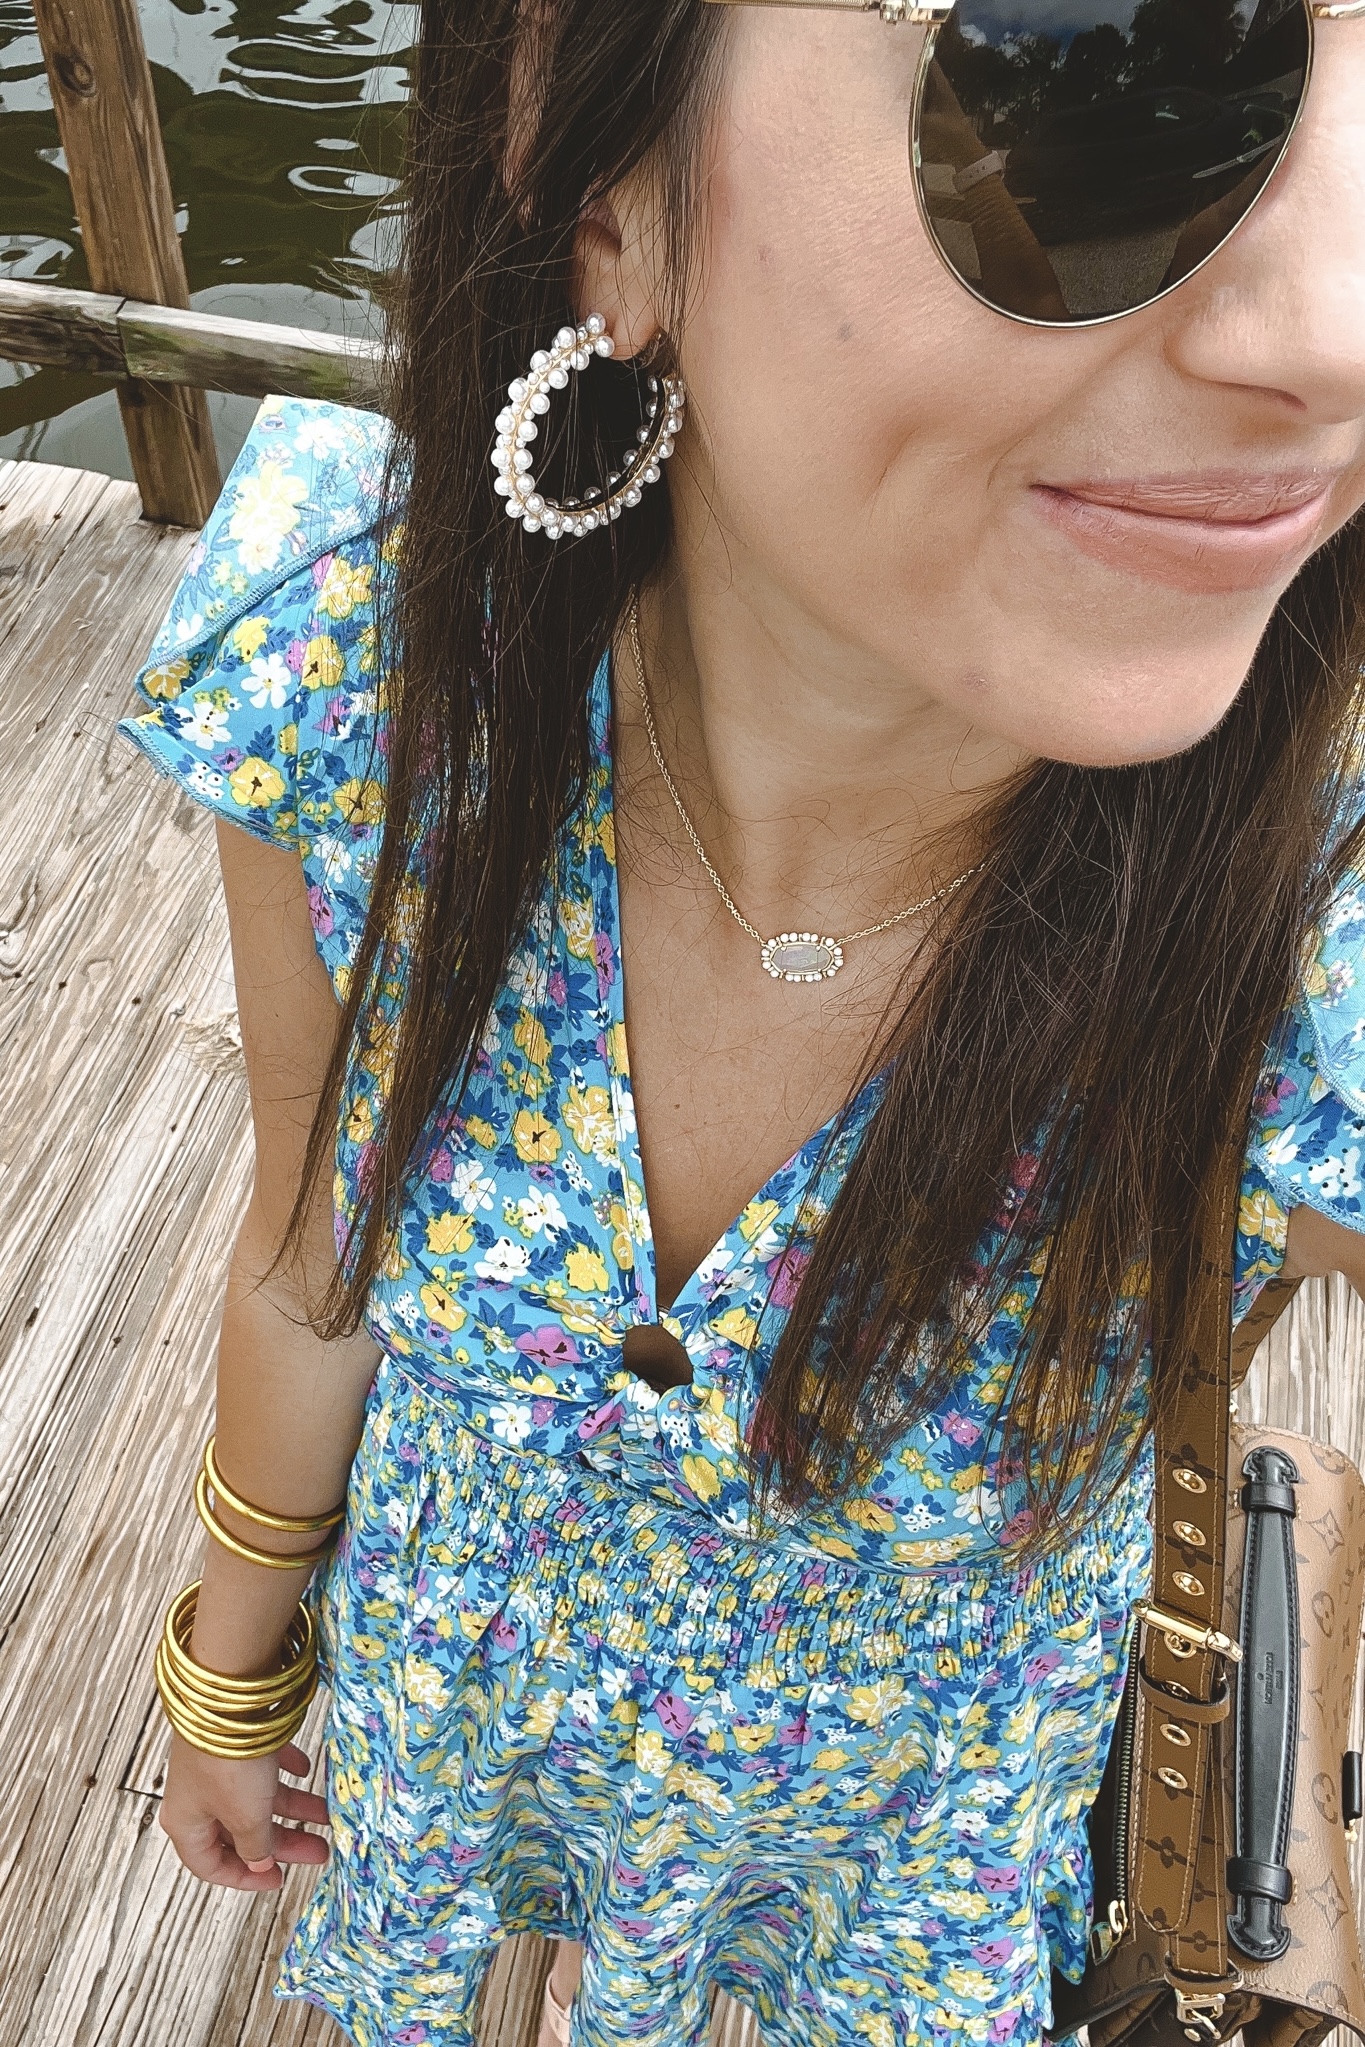 baublebar pearl hoop earrings with kendra scott necklace and blue floral dress